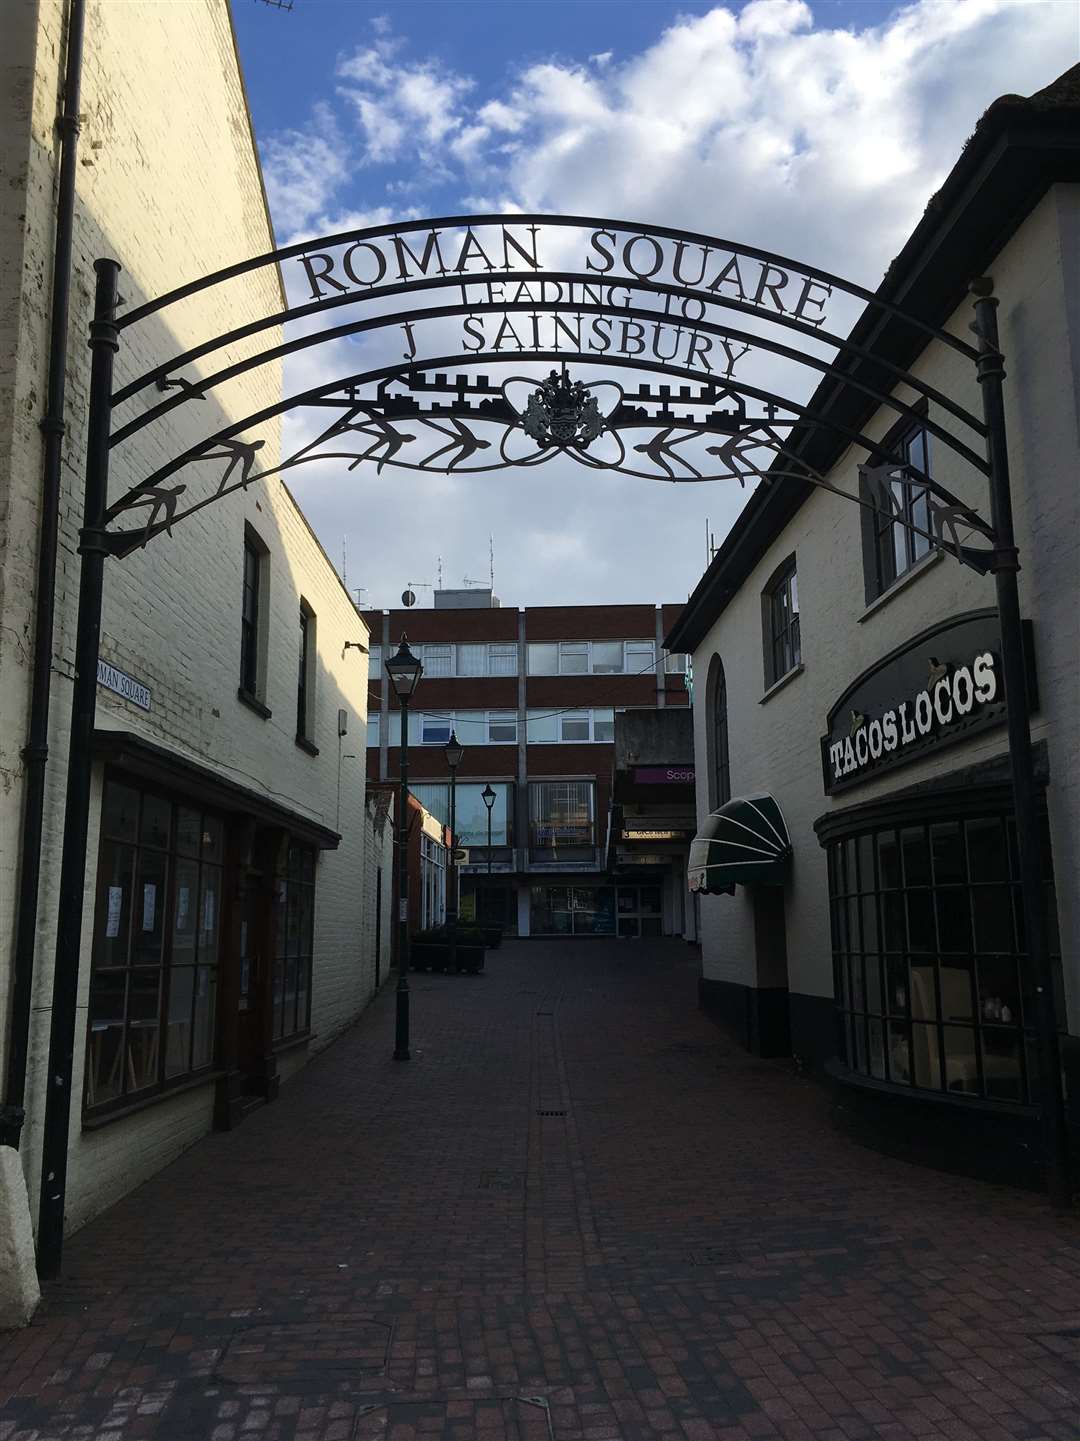 Roman Square Sittingbourne where Dale Howting had been collecting money for charity on his bike